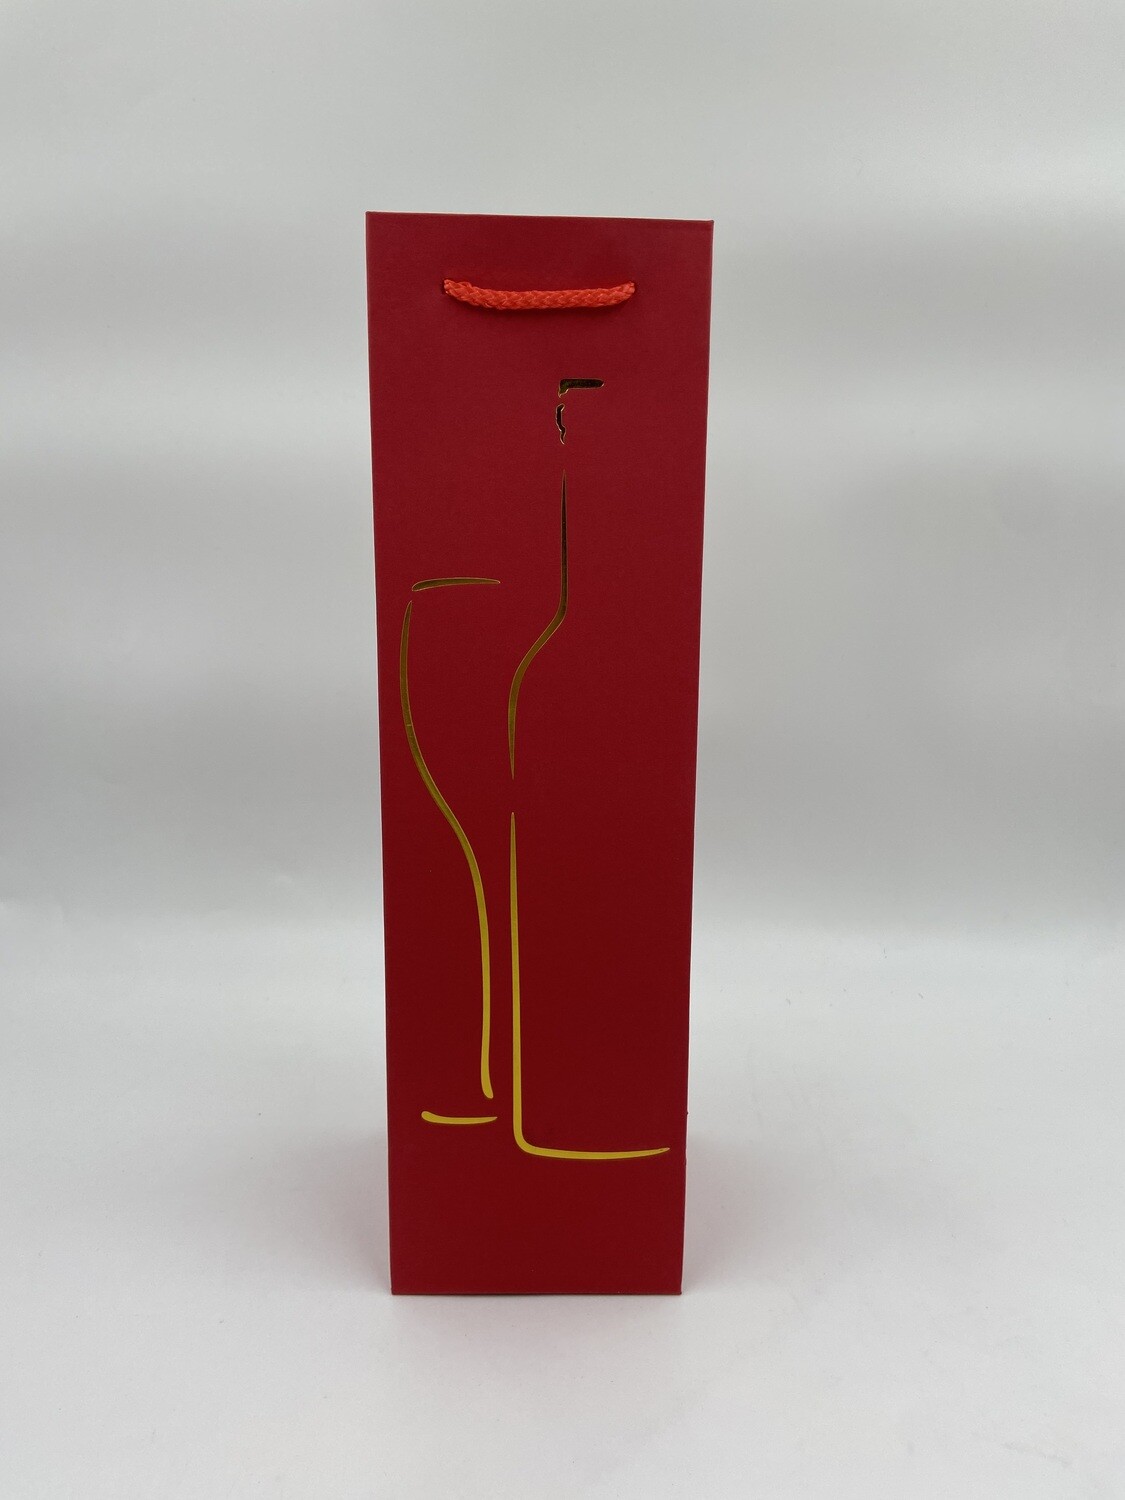 Bottle and Glass Gold Outline Red Wine Bag PK3 (R10.50 Each)